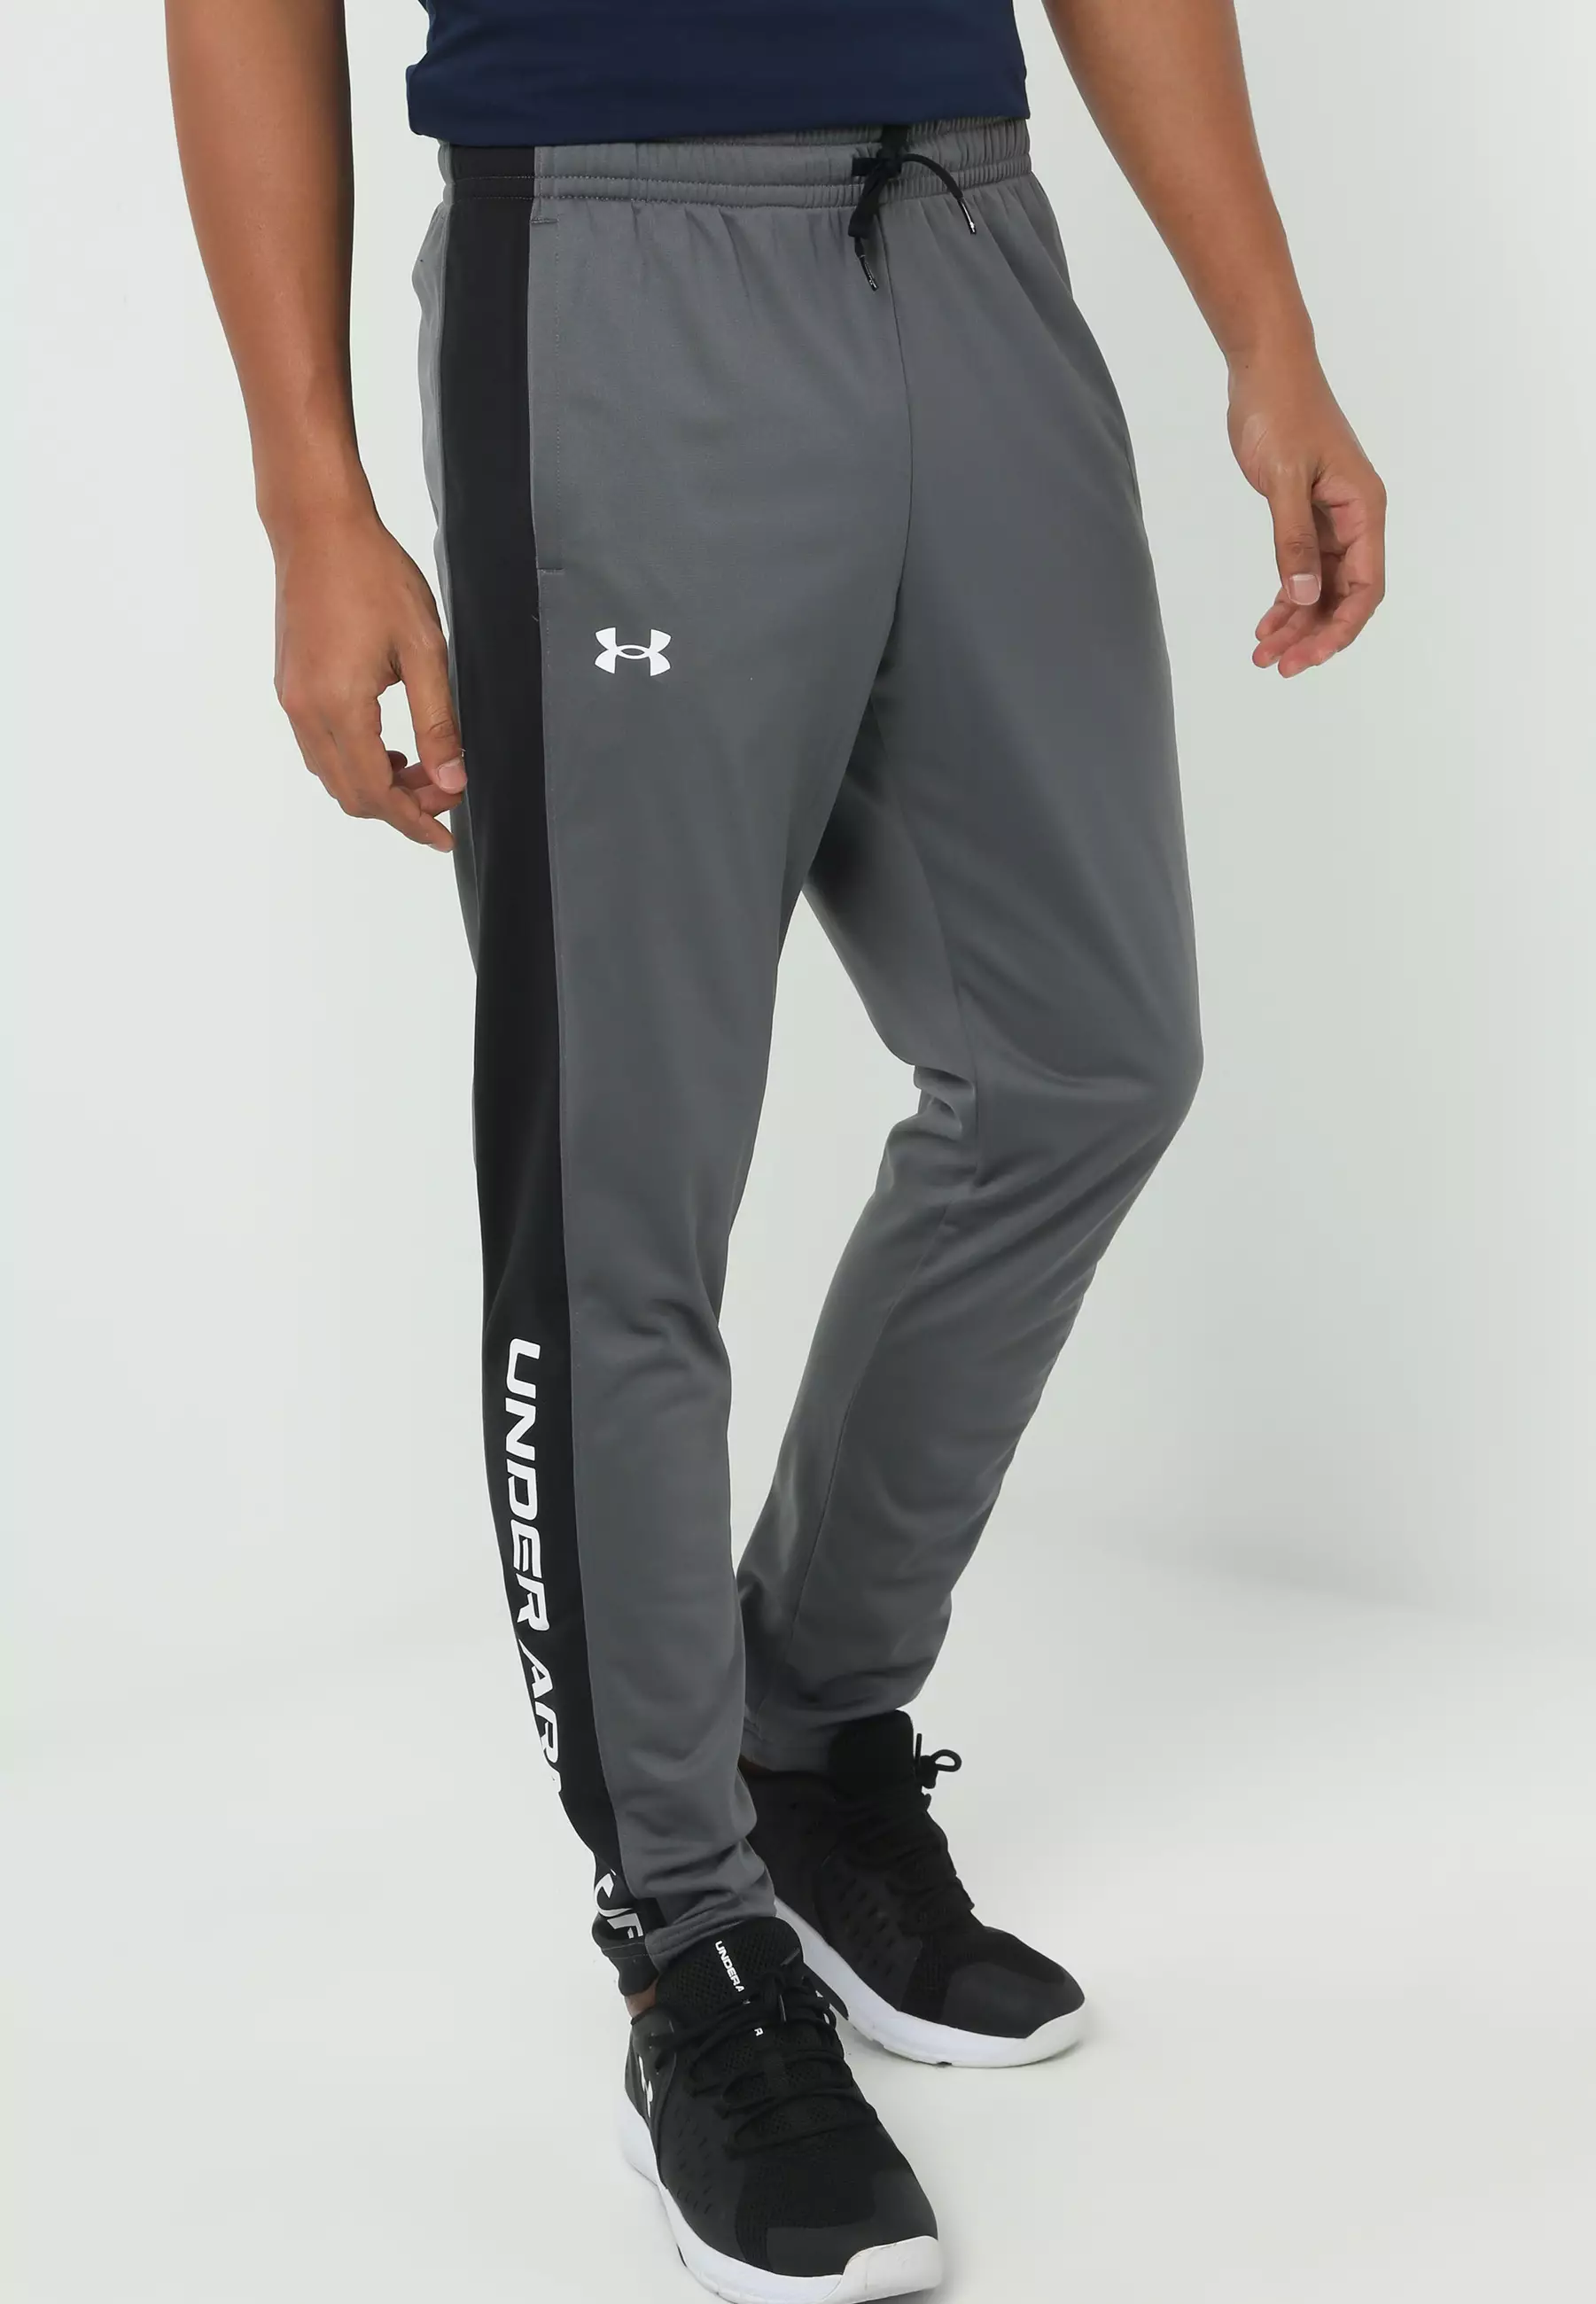 Under Armour Wm Squad 3.0 Warmup Pant